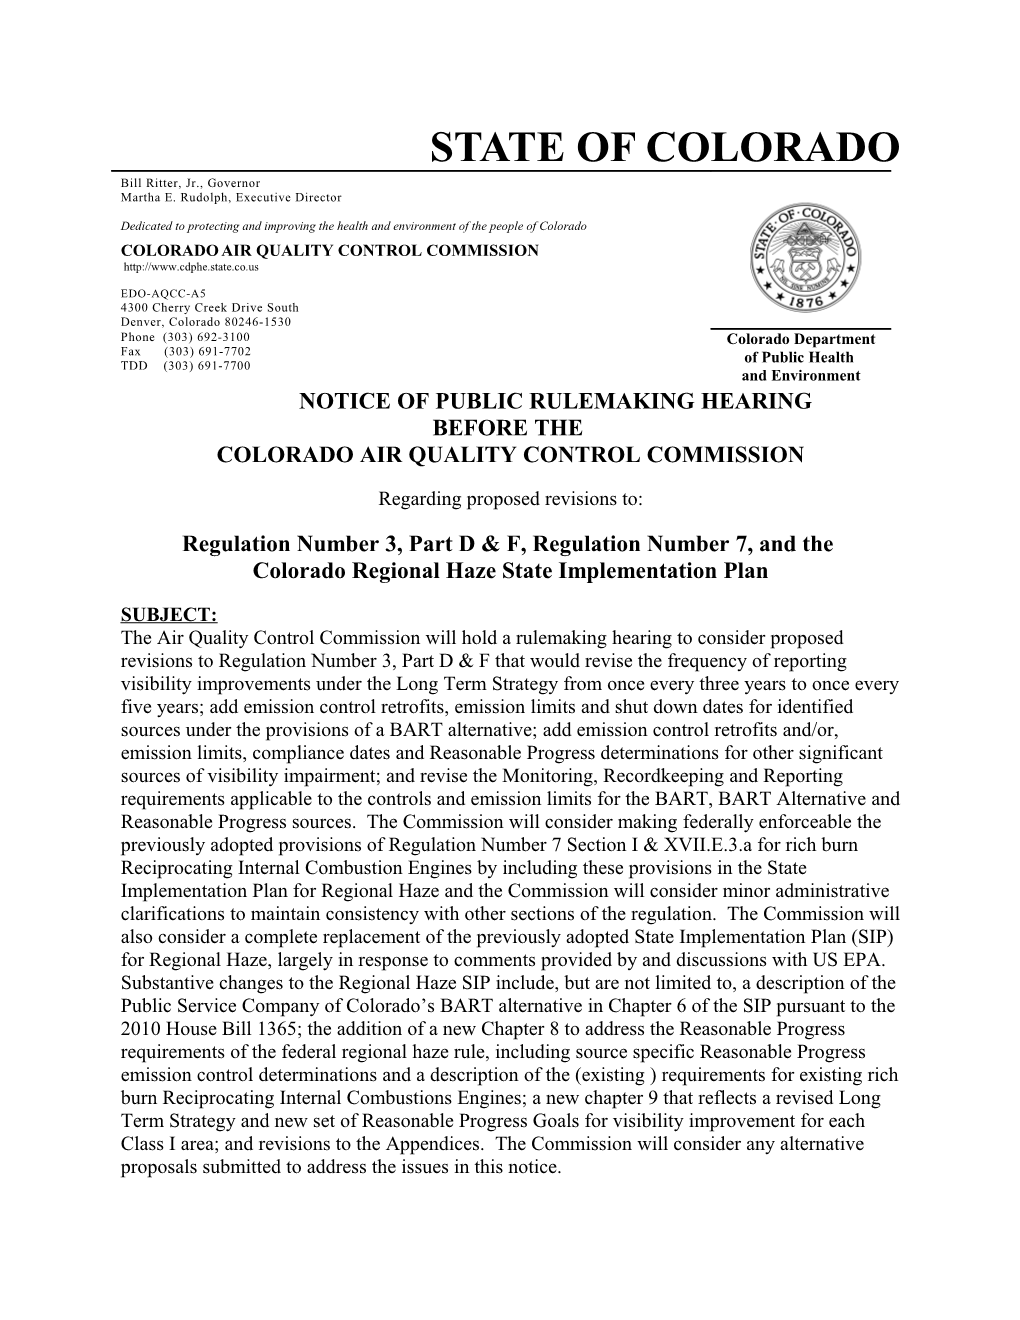 Notice of Public Rulemaking Hearing s1